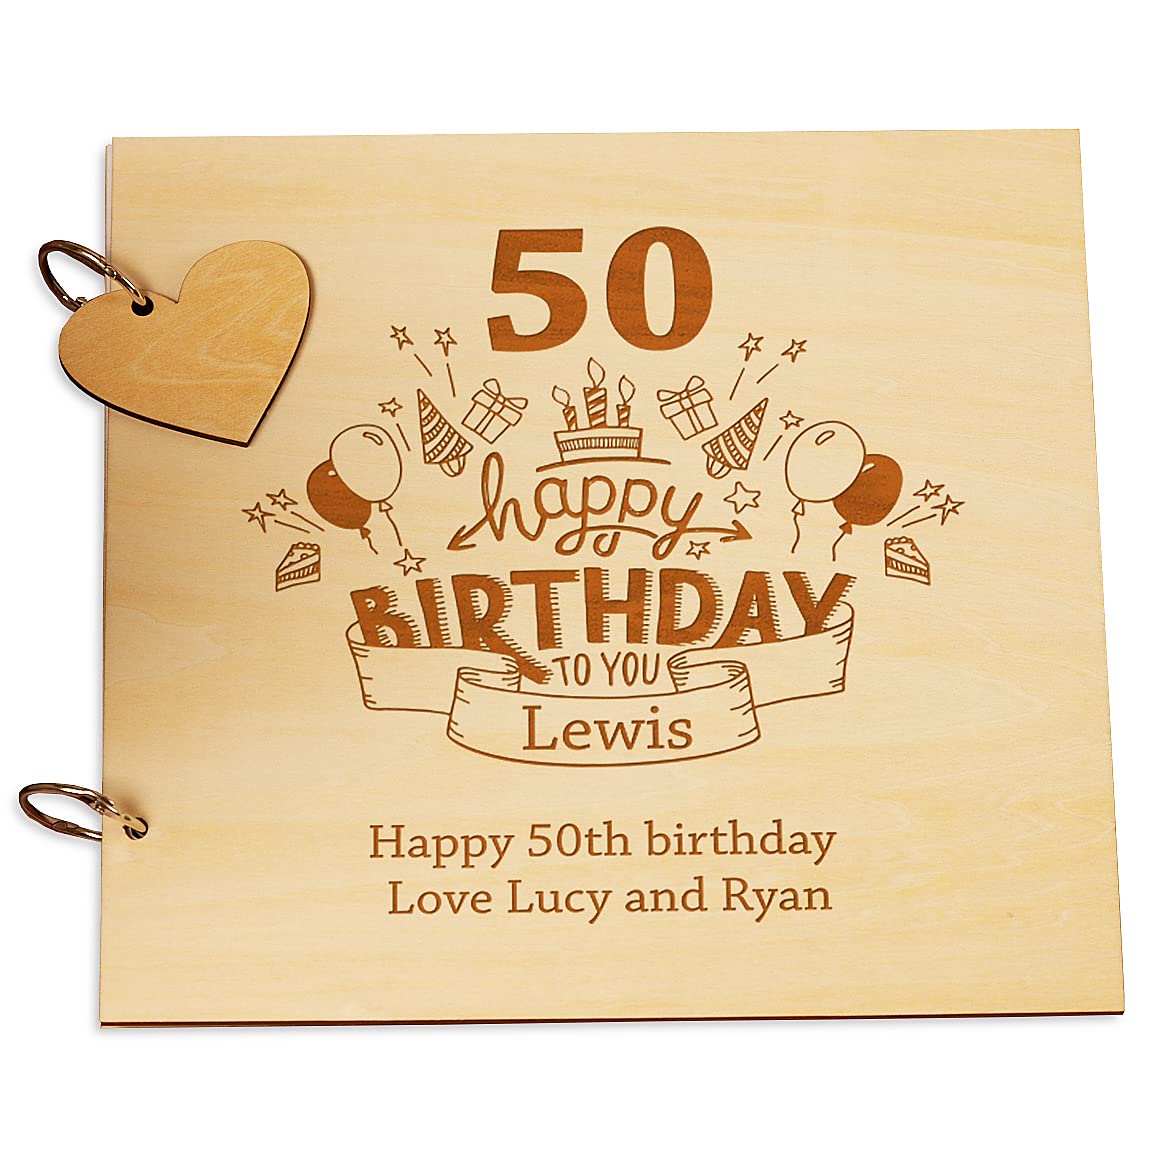 Personalised Wooden 50th Birthday Scrapbook Guest Book or Photo Album